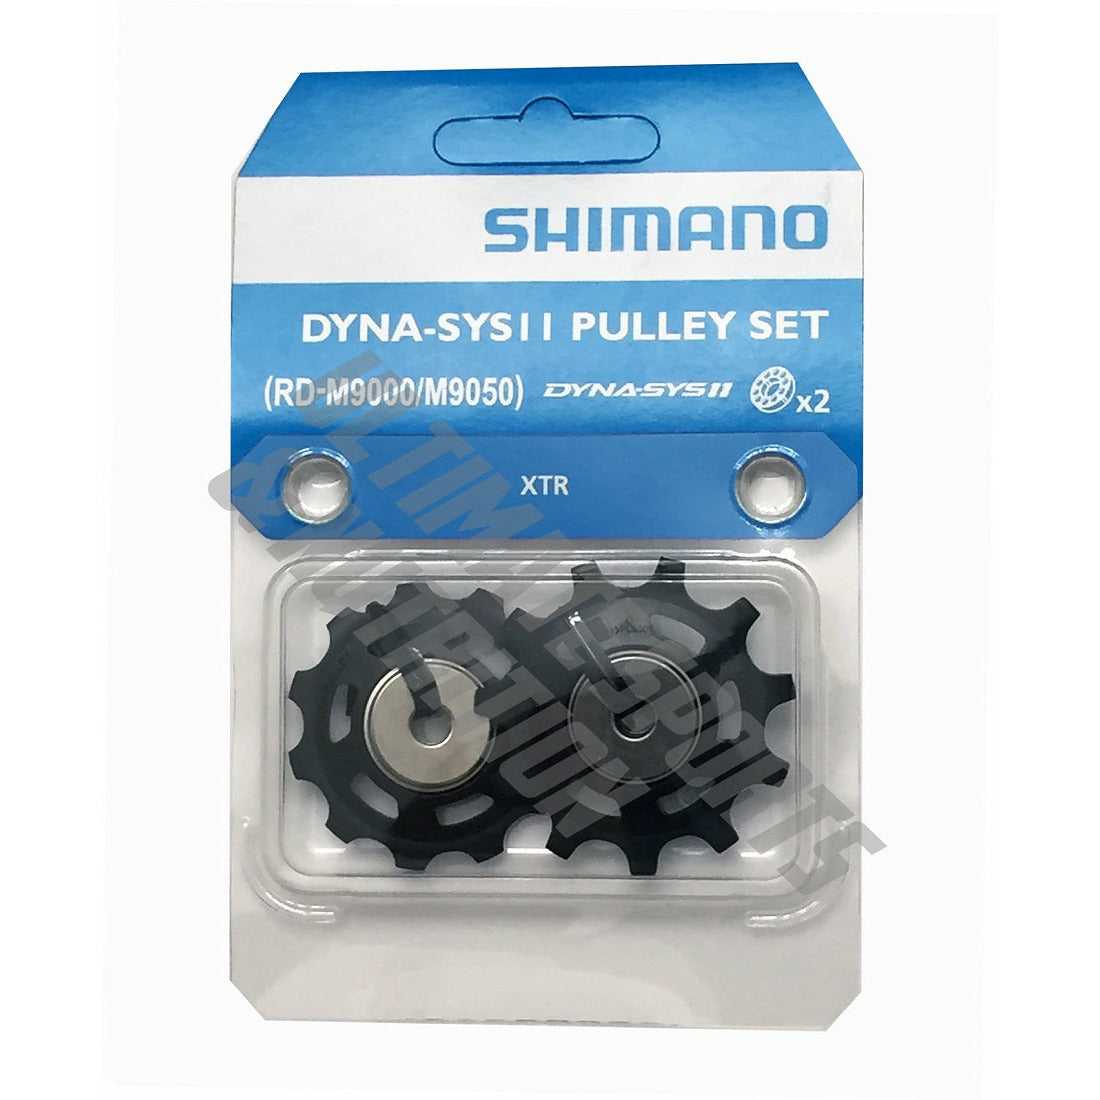 Shimano XTR M9050 M9000 11 Spd Pulleys RD-M9000 Guide & Tension Pulley Y5PV98160